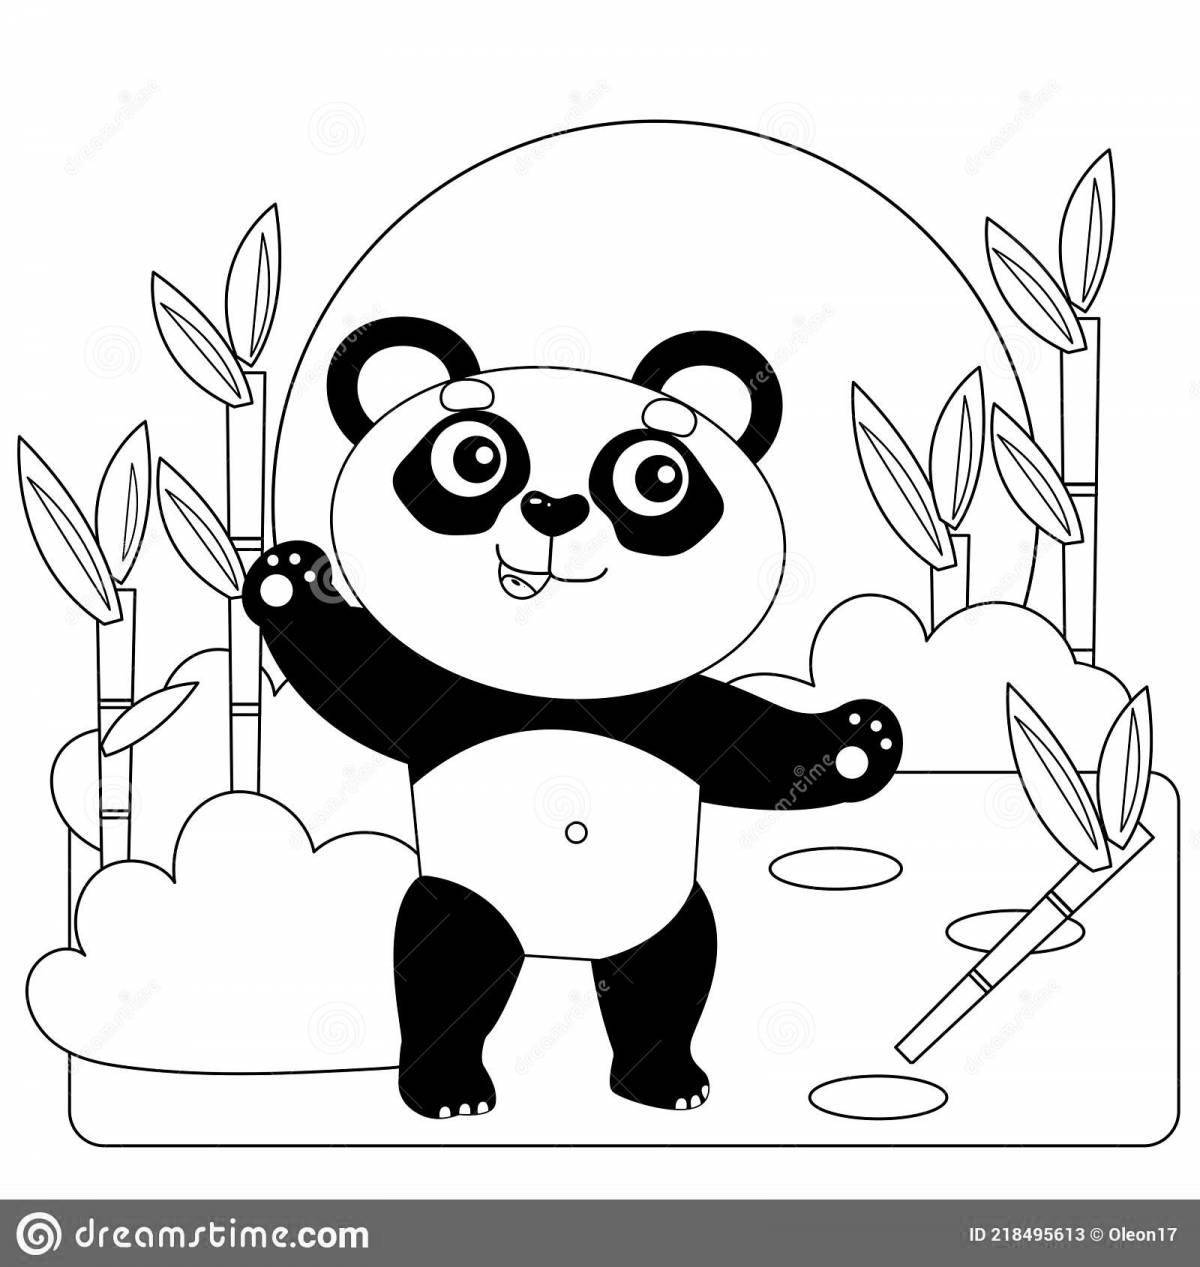 Coloring page glowing panda with bamboo